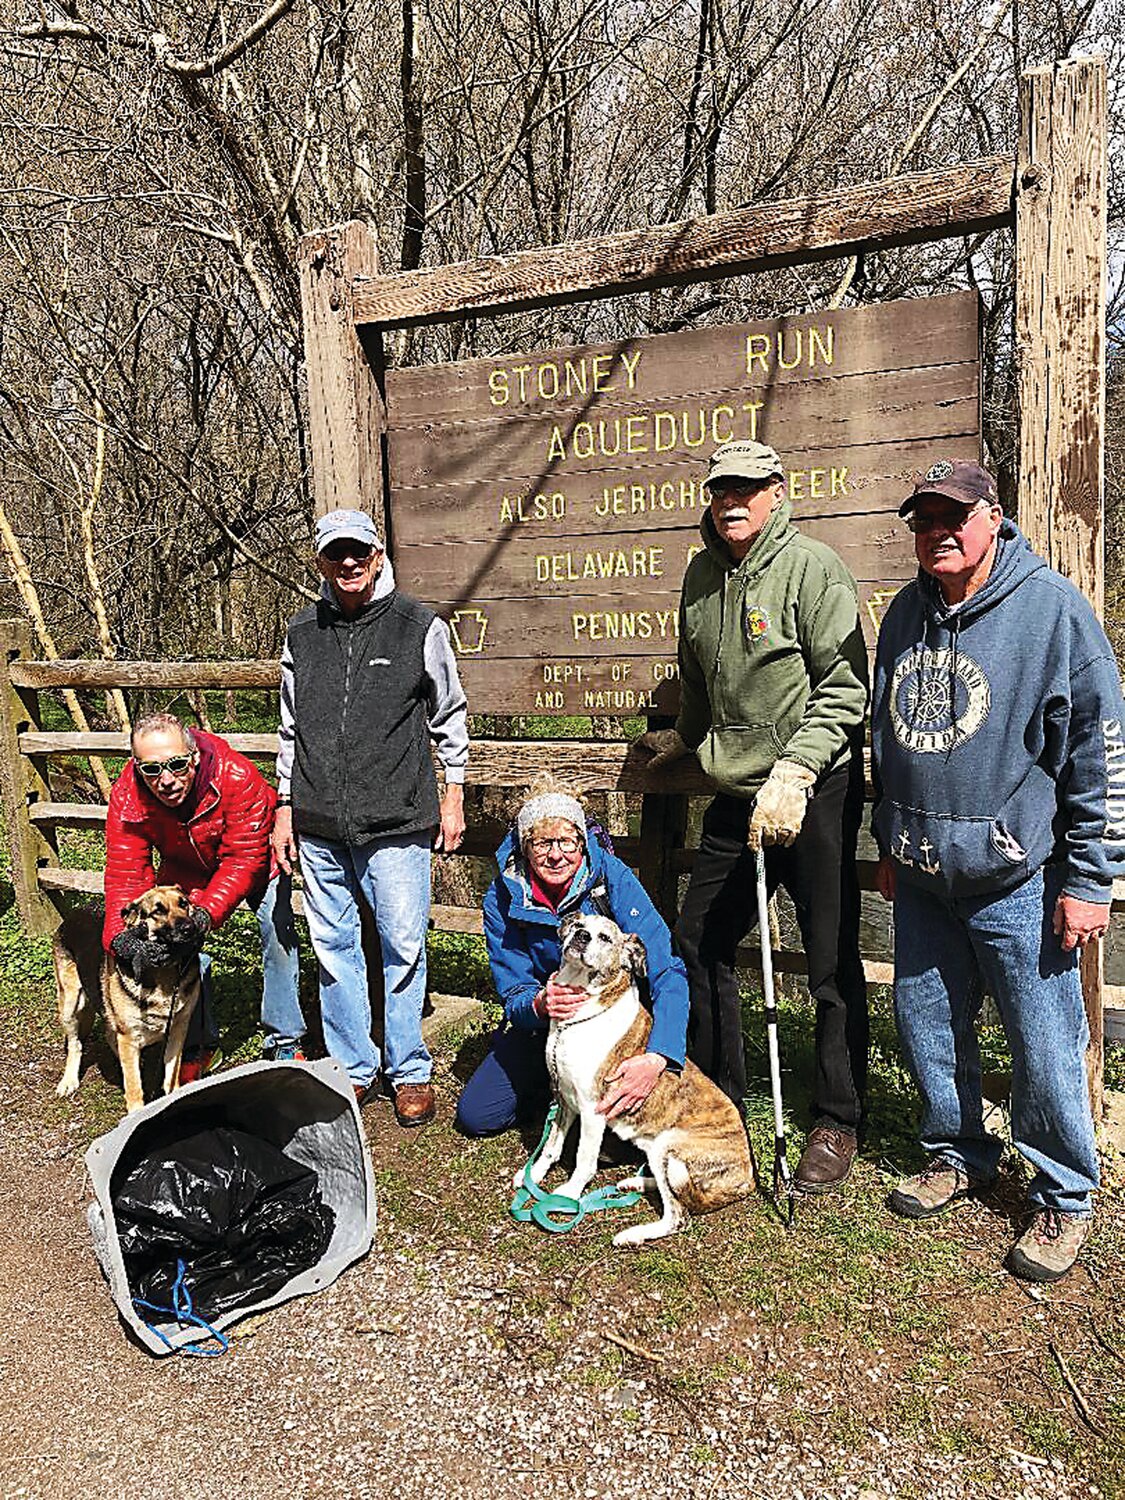 Volunteers stationed near the Stoney Run Aqueduct took part in the April 13 Delaware Canal cleanup event.